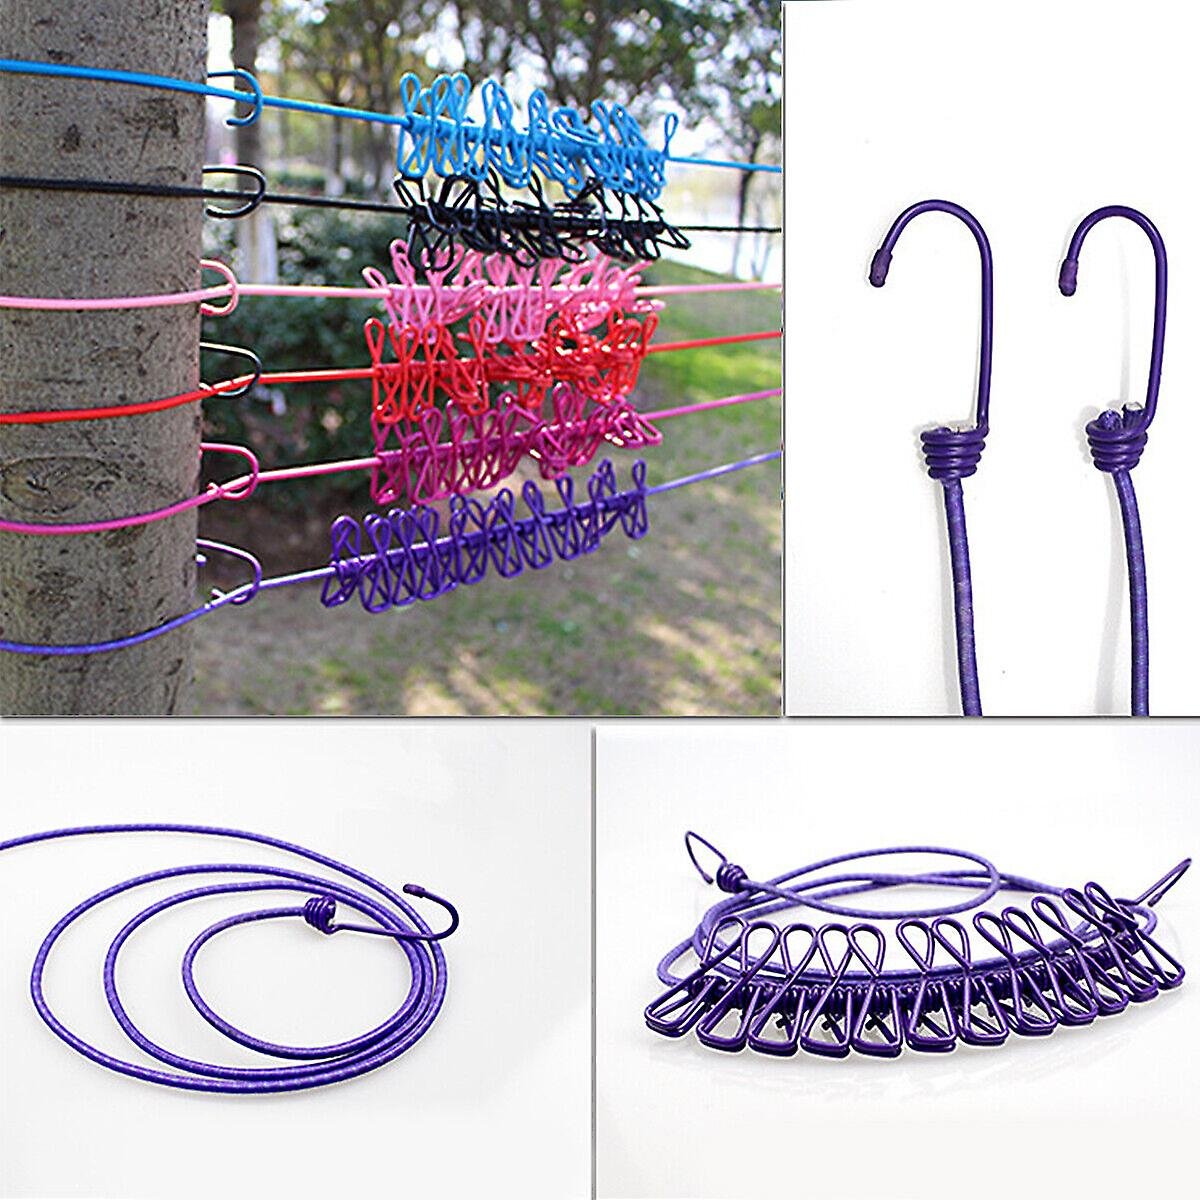 Cloth Drying rope with 12 clips